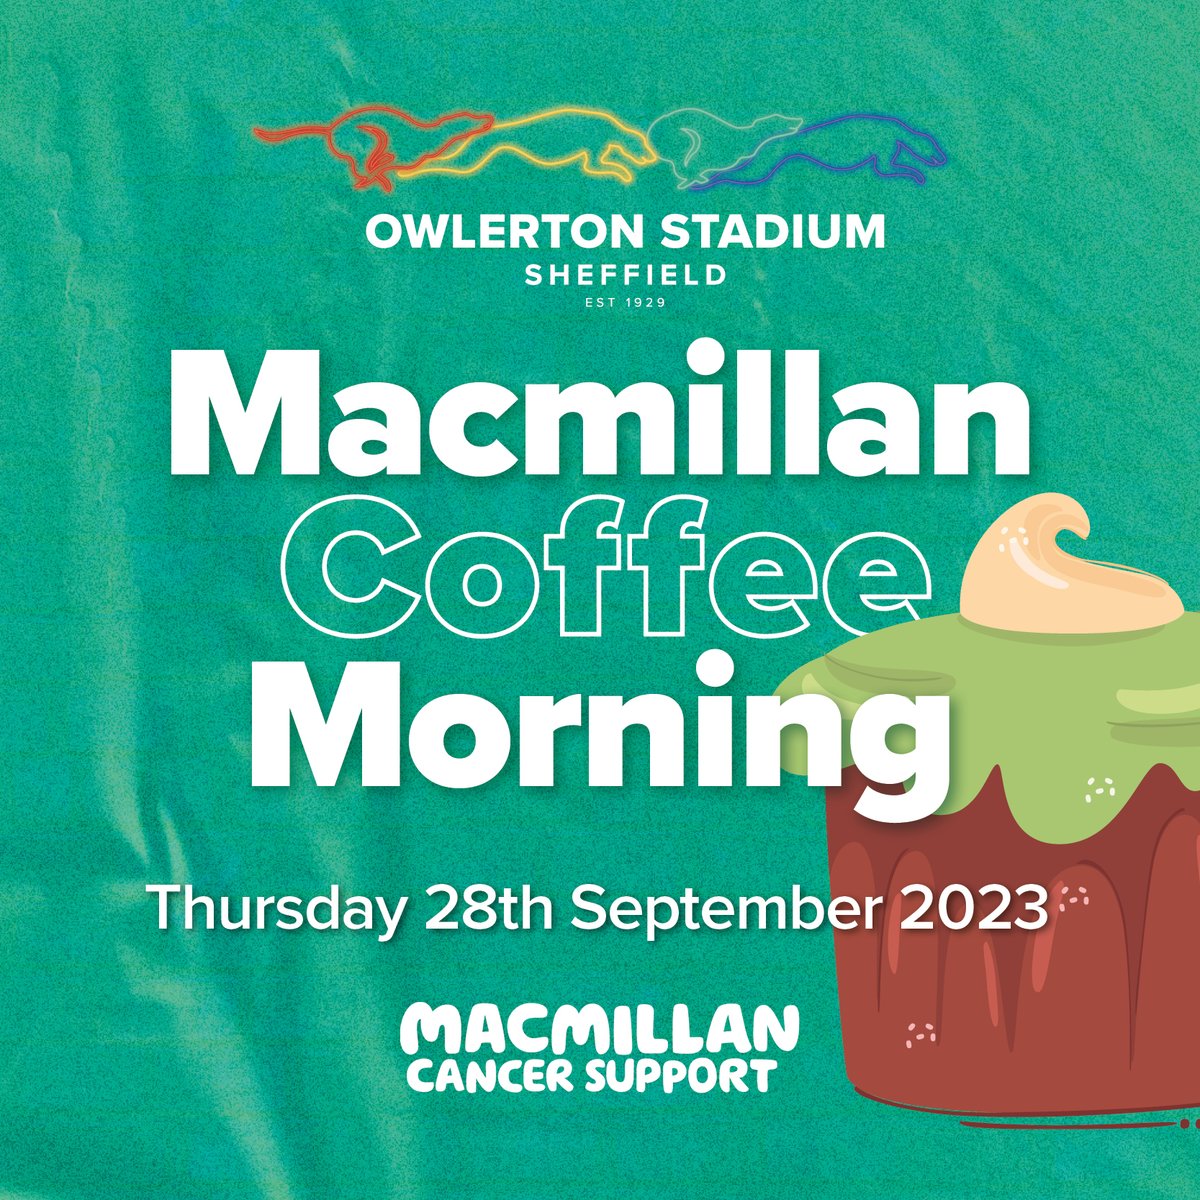 Join us tomorrow! 💚

🗓️ Thursday 28th September 2023
📍 Owlerton Stadium 
⏰ 11 am 

We hope you can join us 🤩

#Macmillan #Cancercharity #Cancersupport #Coffeemorning